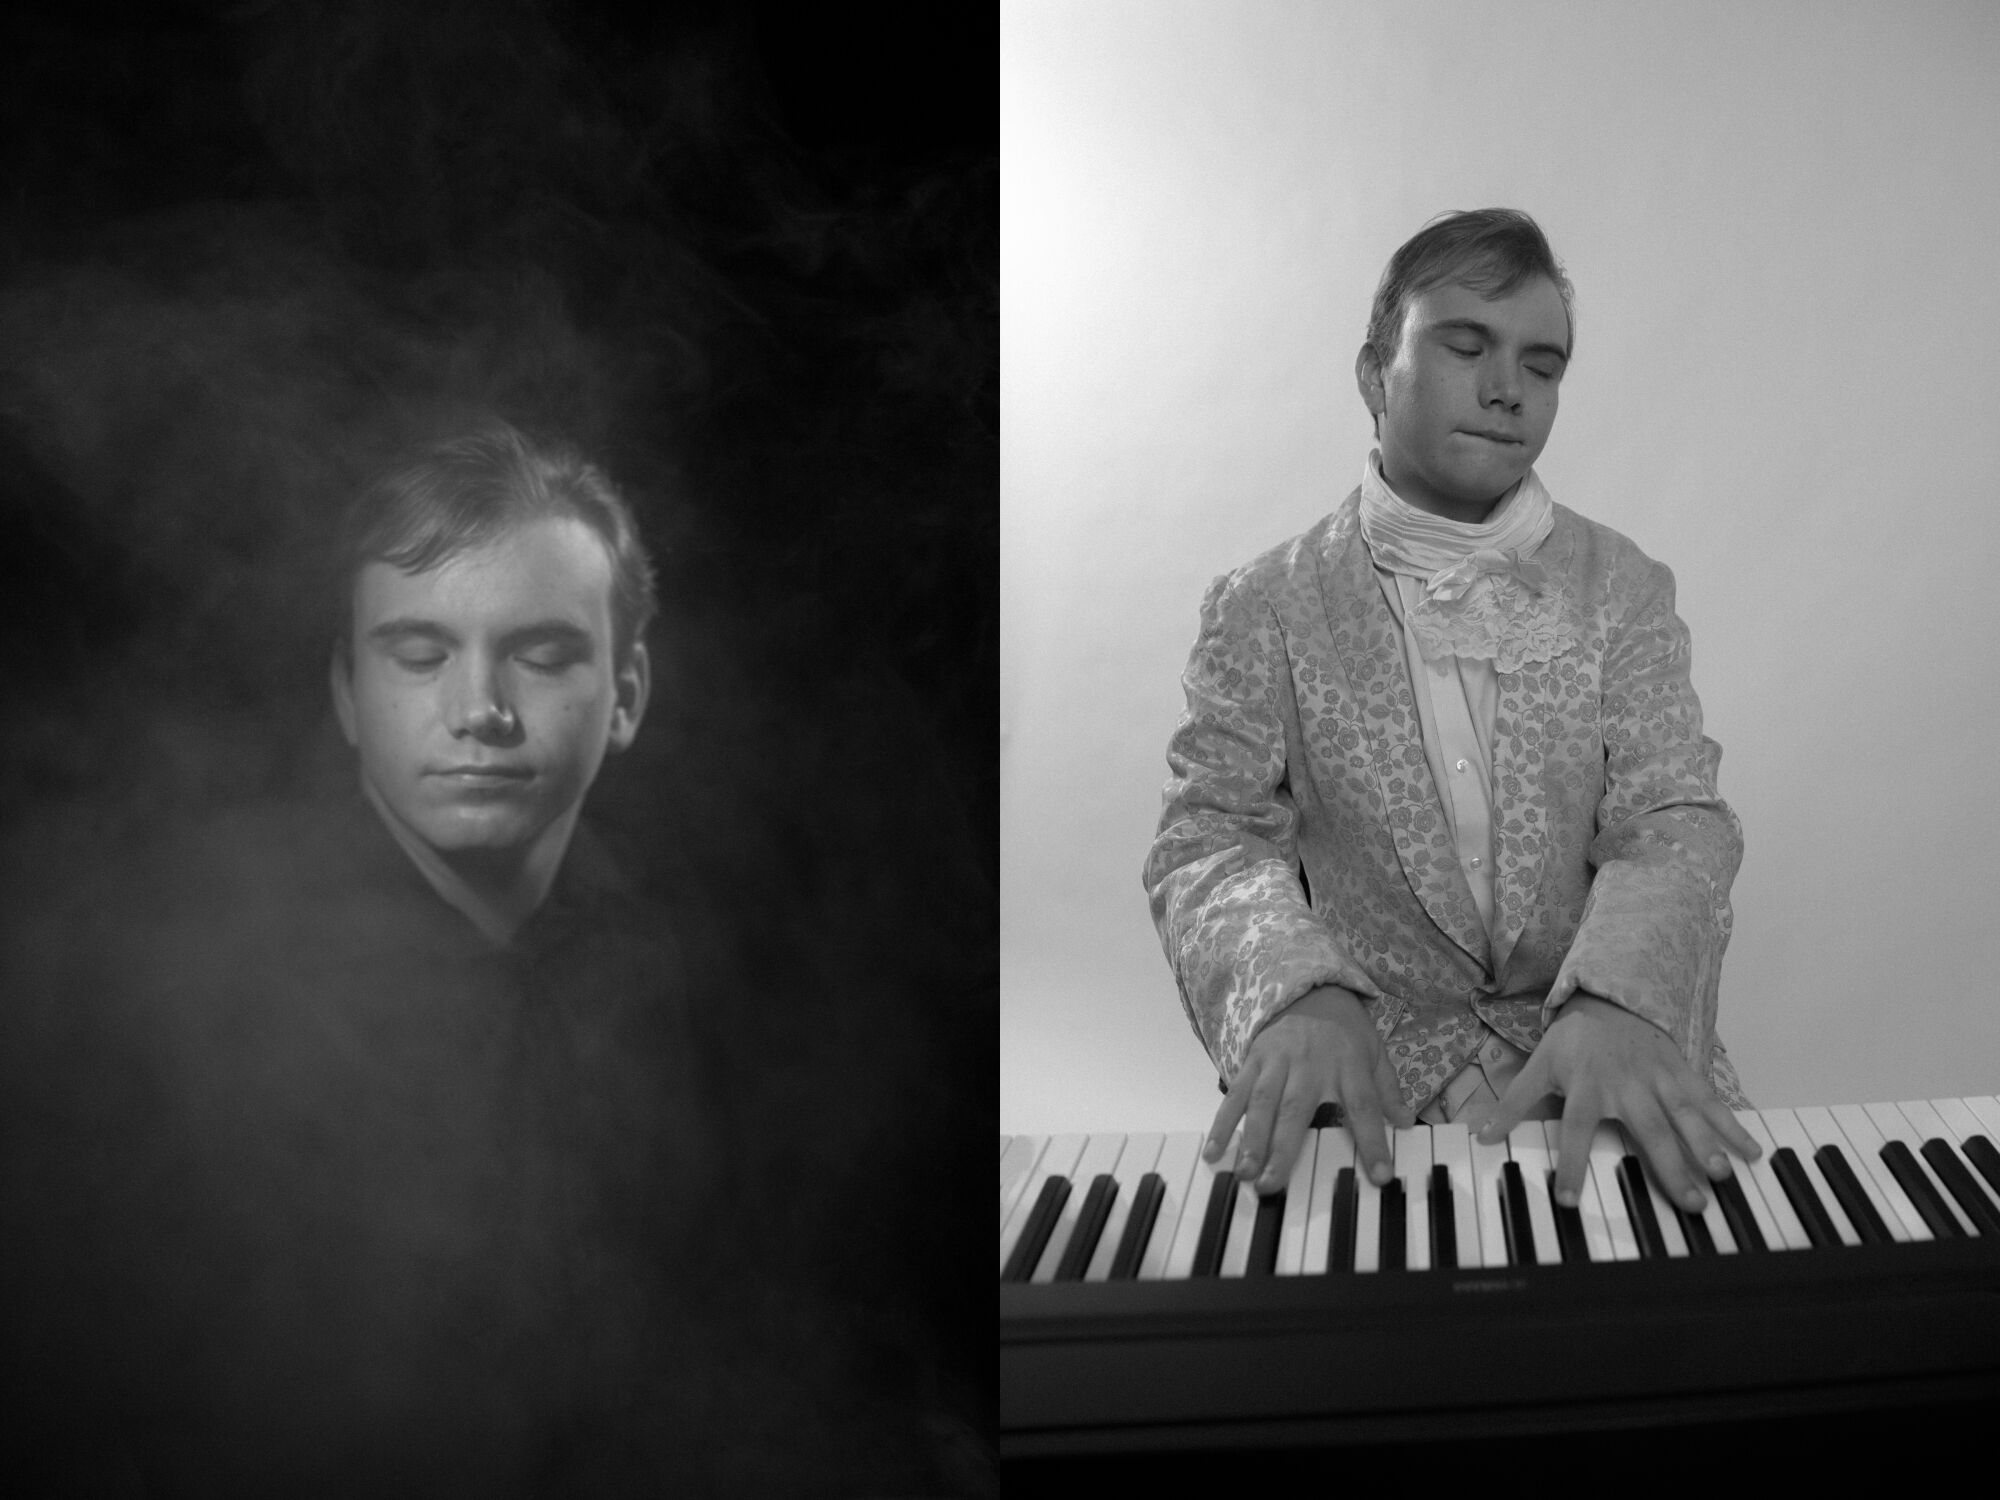 A split image shows a man closing his eyes surrounded by mist, left, and playing the piano in costume, right.